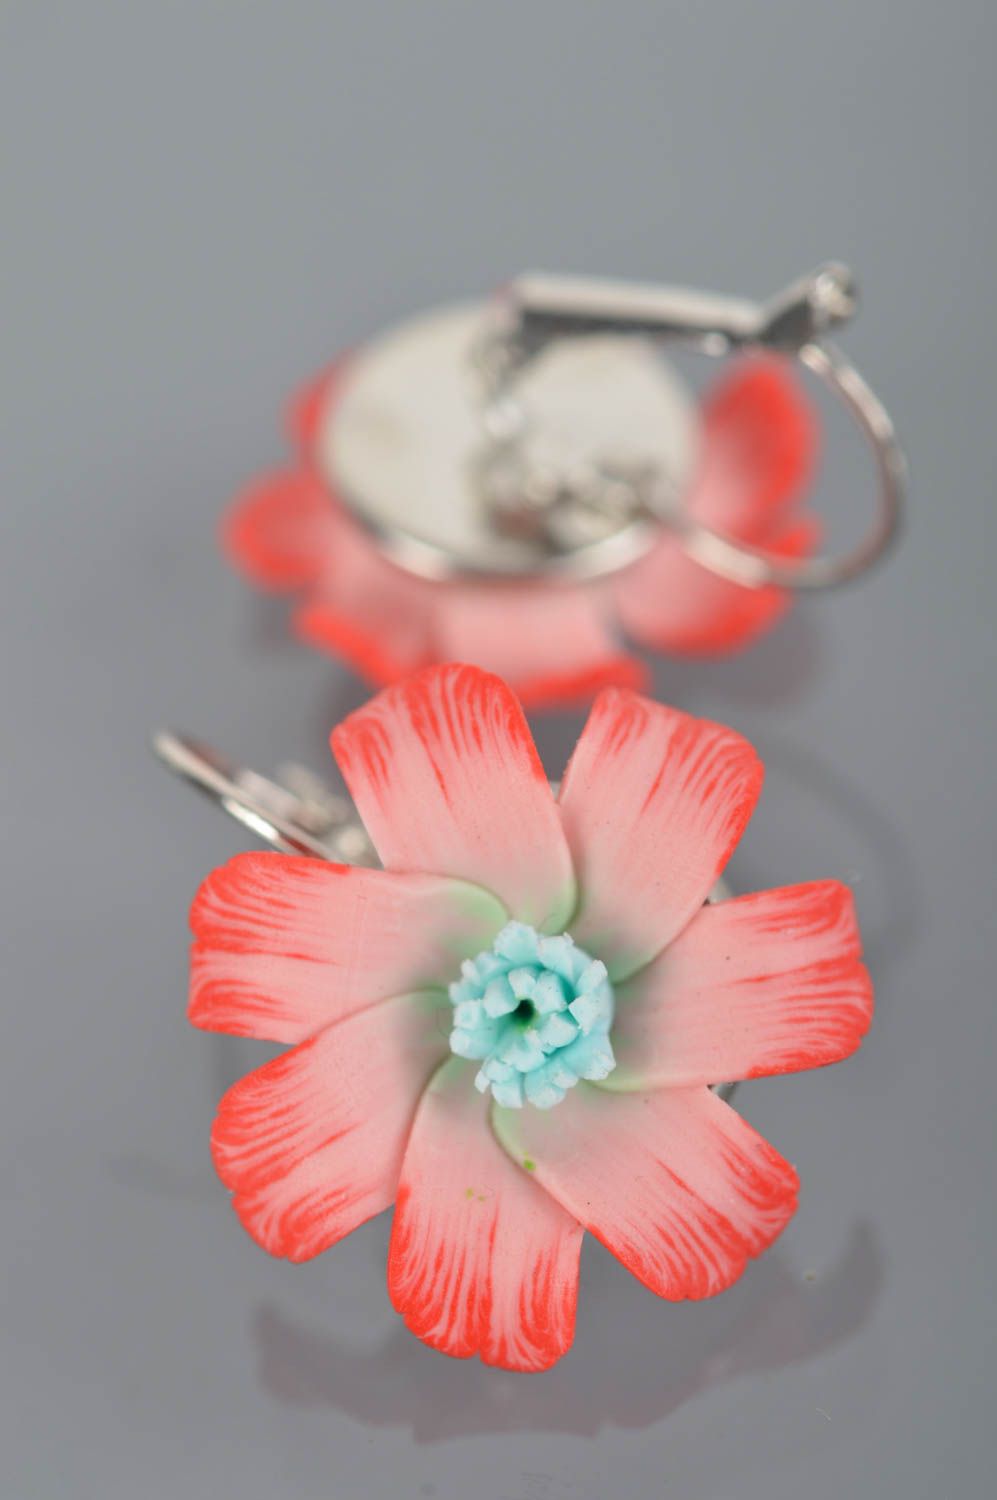 Flower earrings made of polymer clay with pink flowers designer accessory photo 4